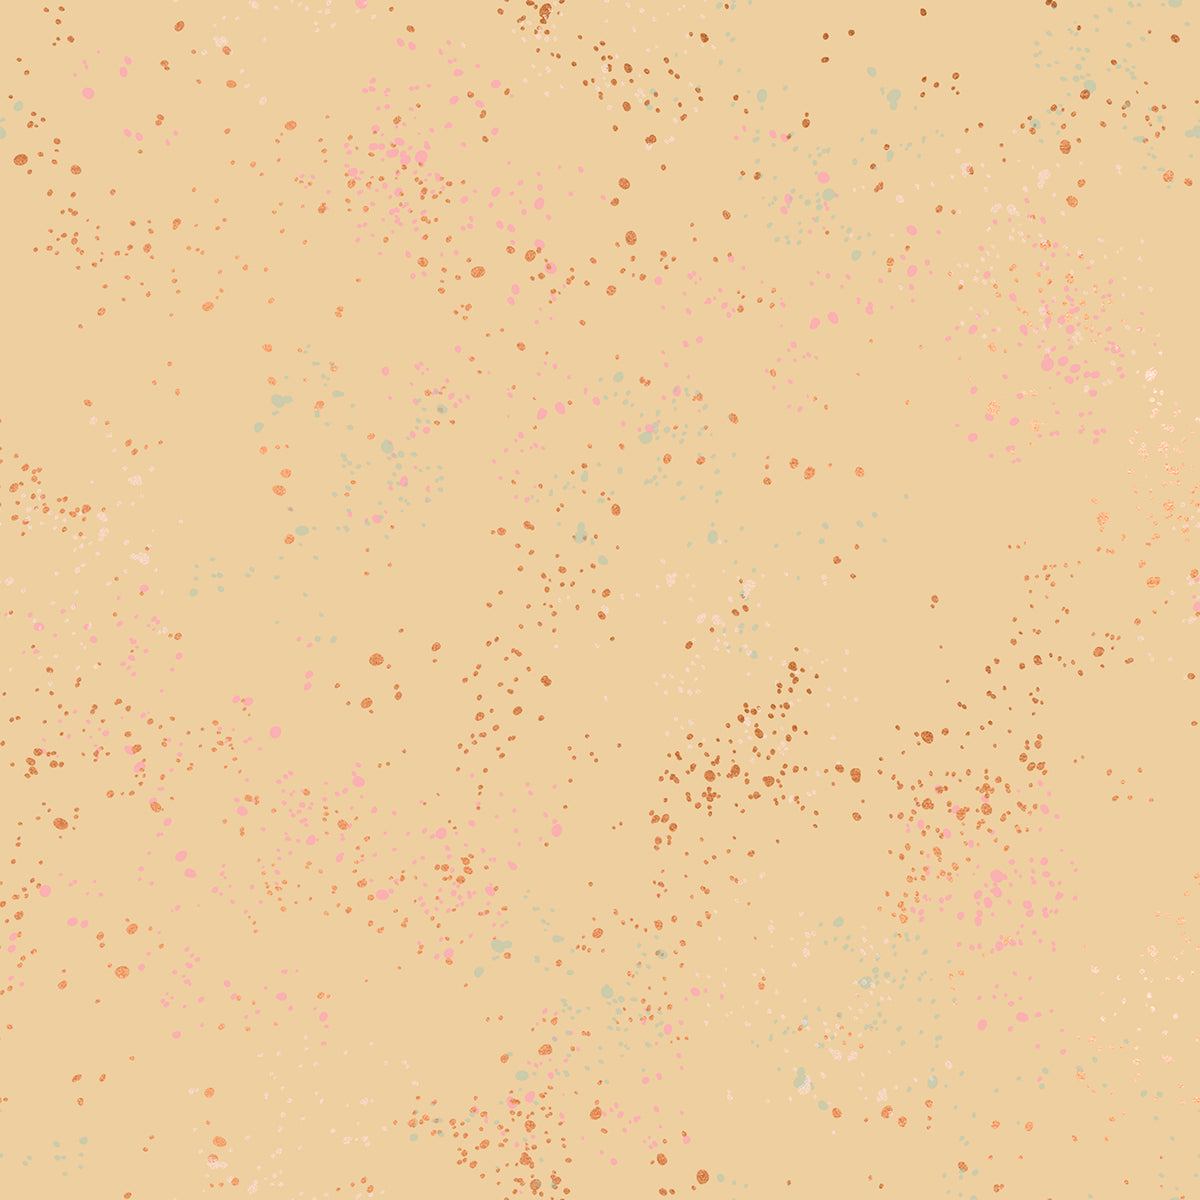 Speckled Quilt Fabric by Ruby Star Society - Parchment Tan - RS5027 97M